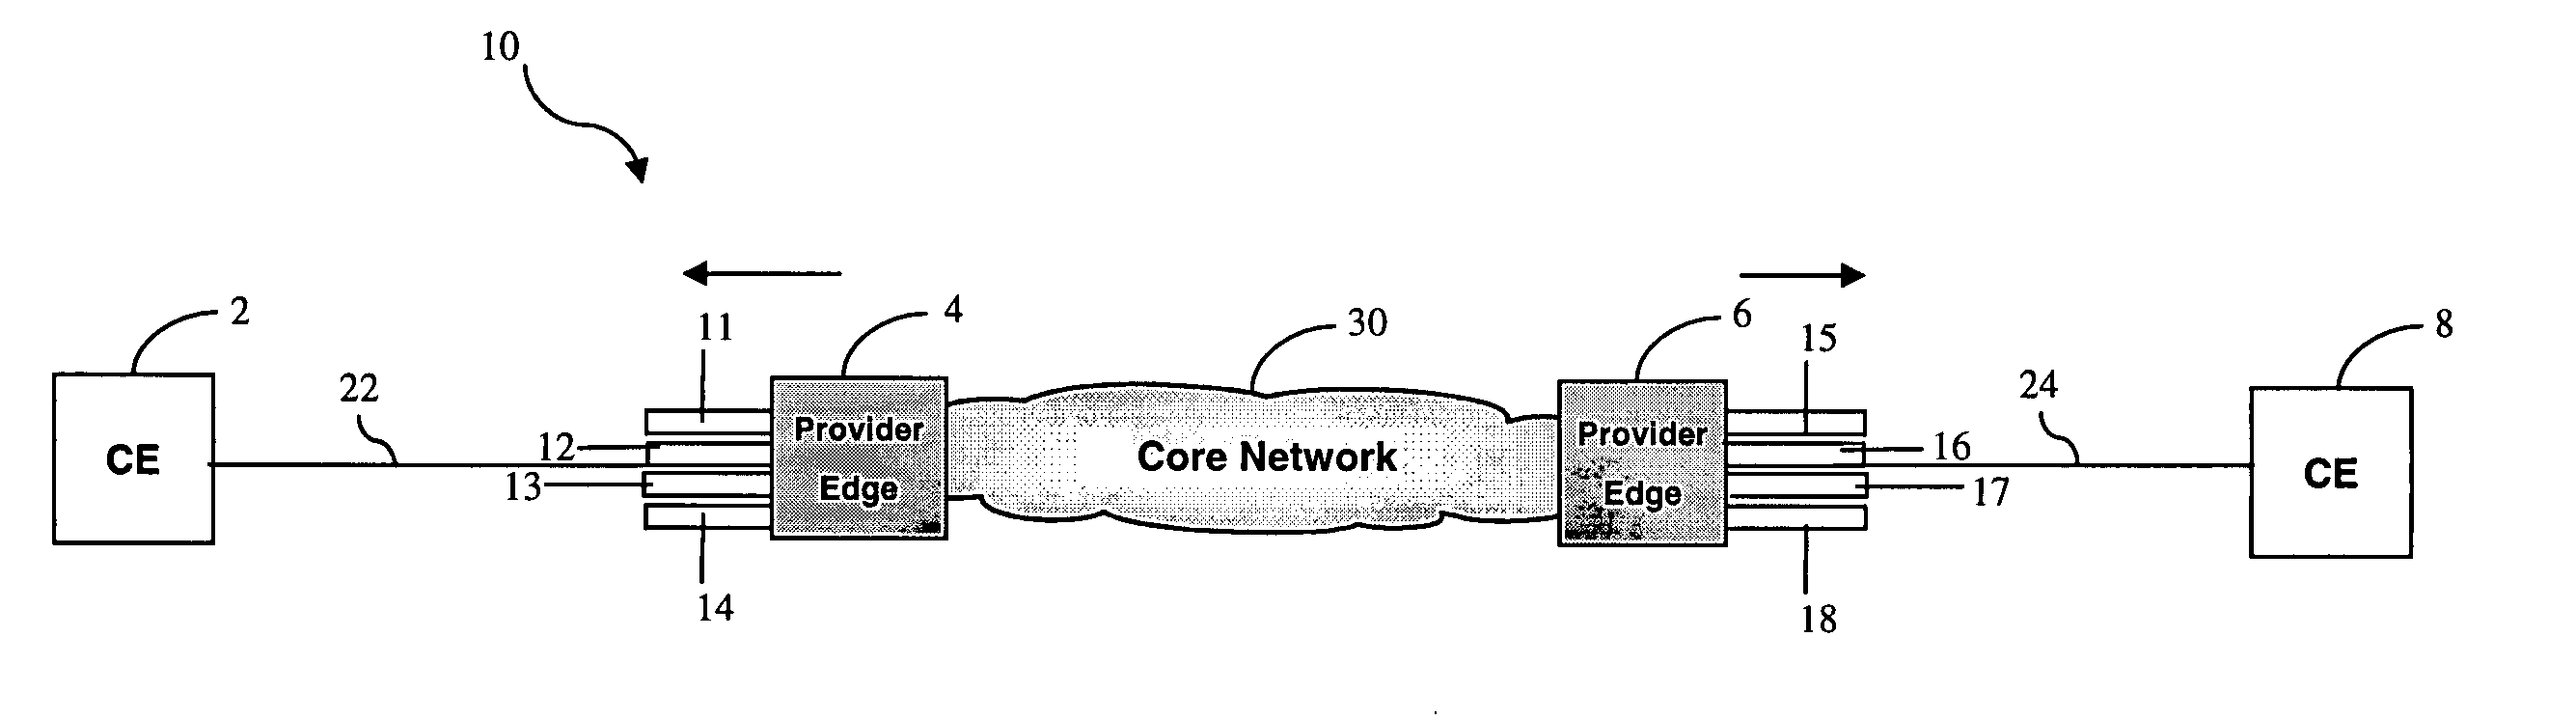 Ethernet to ATM interworking with multiple quality of service levels